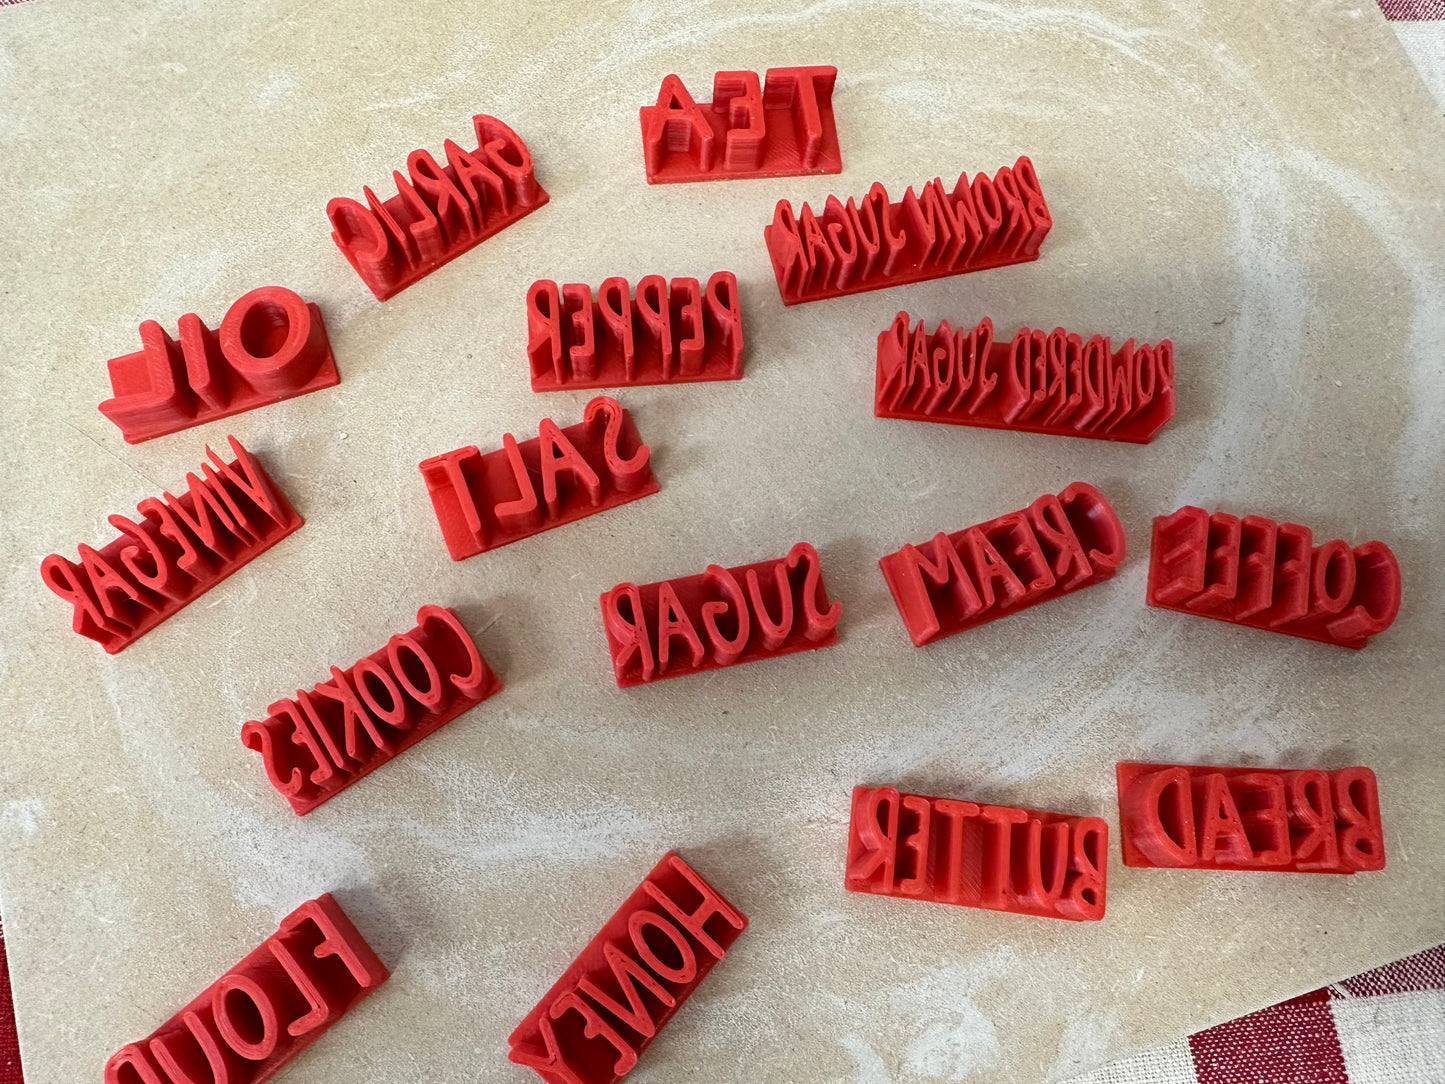 Baking and Pantry Words Pottery Stamps - Flour, sugar, coffee, etc, 3D Printed, each or set